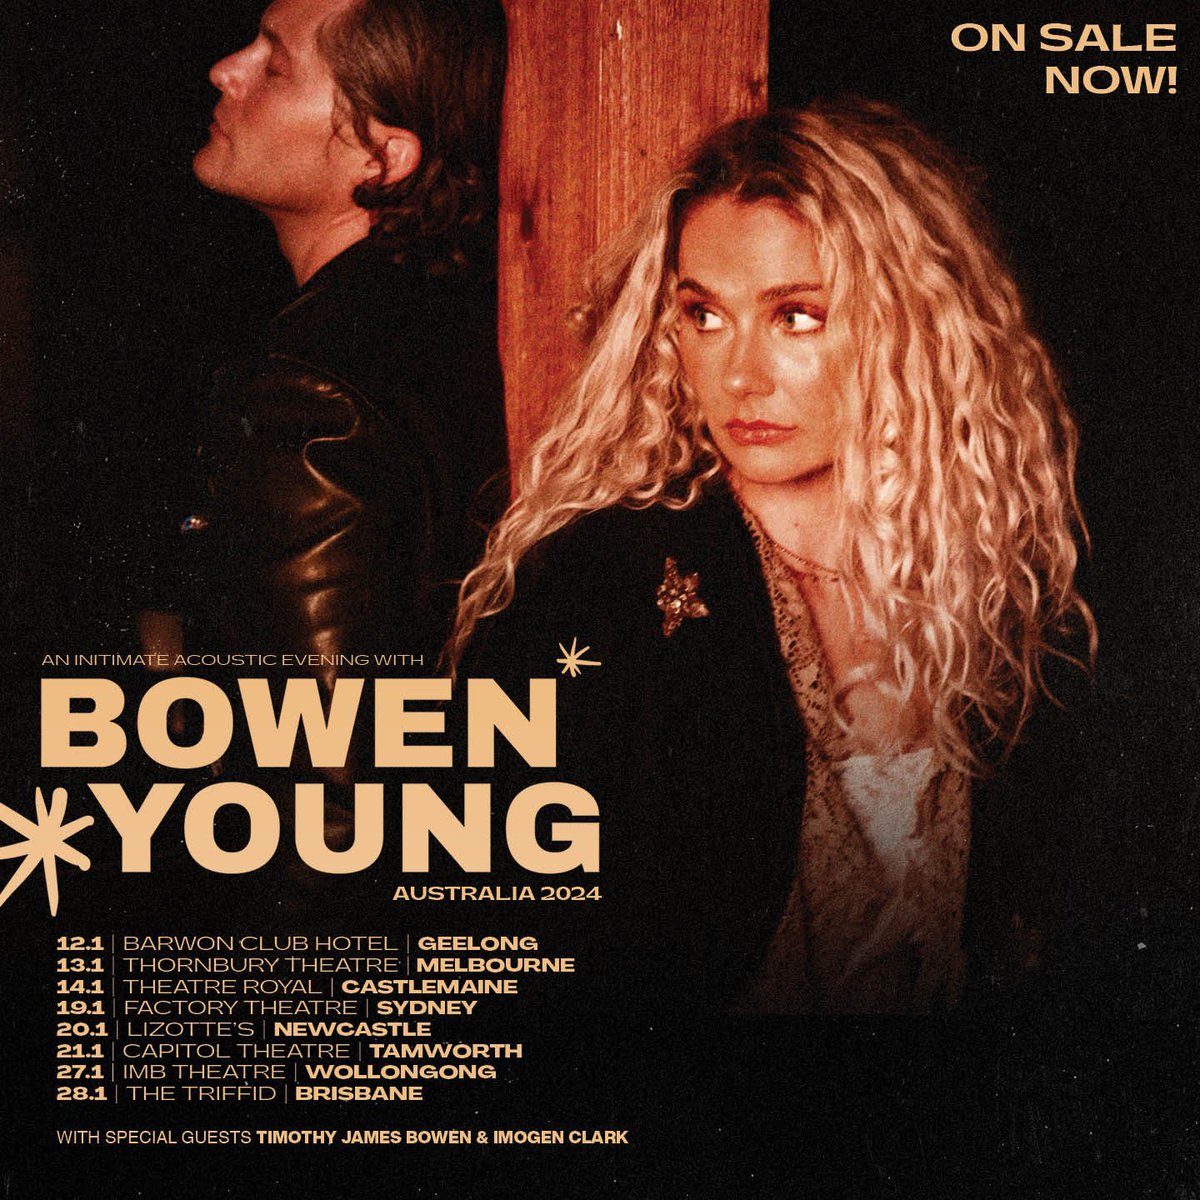 🌈AUSTRALIA!🌈 ON SALE NOW! 🎟️✨ Go get your tickets for our January tour with @timothyjamesbowen & @imogenclarkmusic here 👉🏼✨ bowenyoung.com. #bowenyoung #bowenyoungtour #australia #australiantour #americana #clarebowen #brandonrobertyoung #timothyjamesbowen